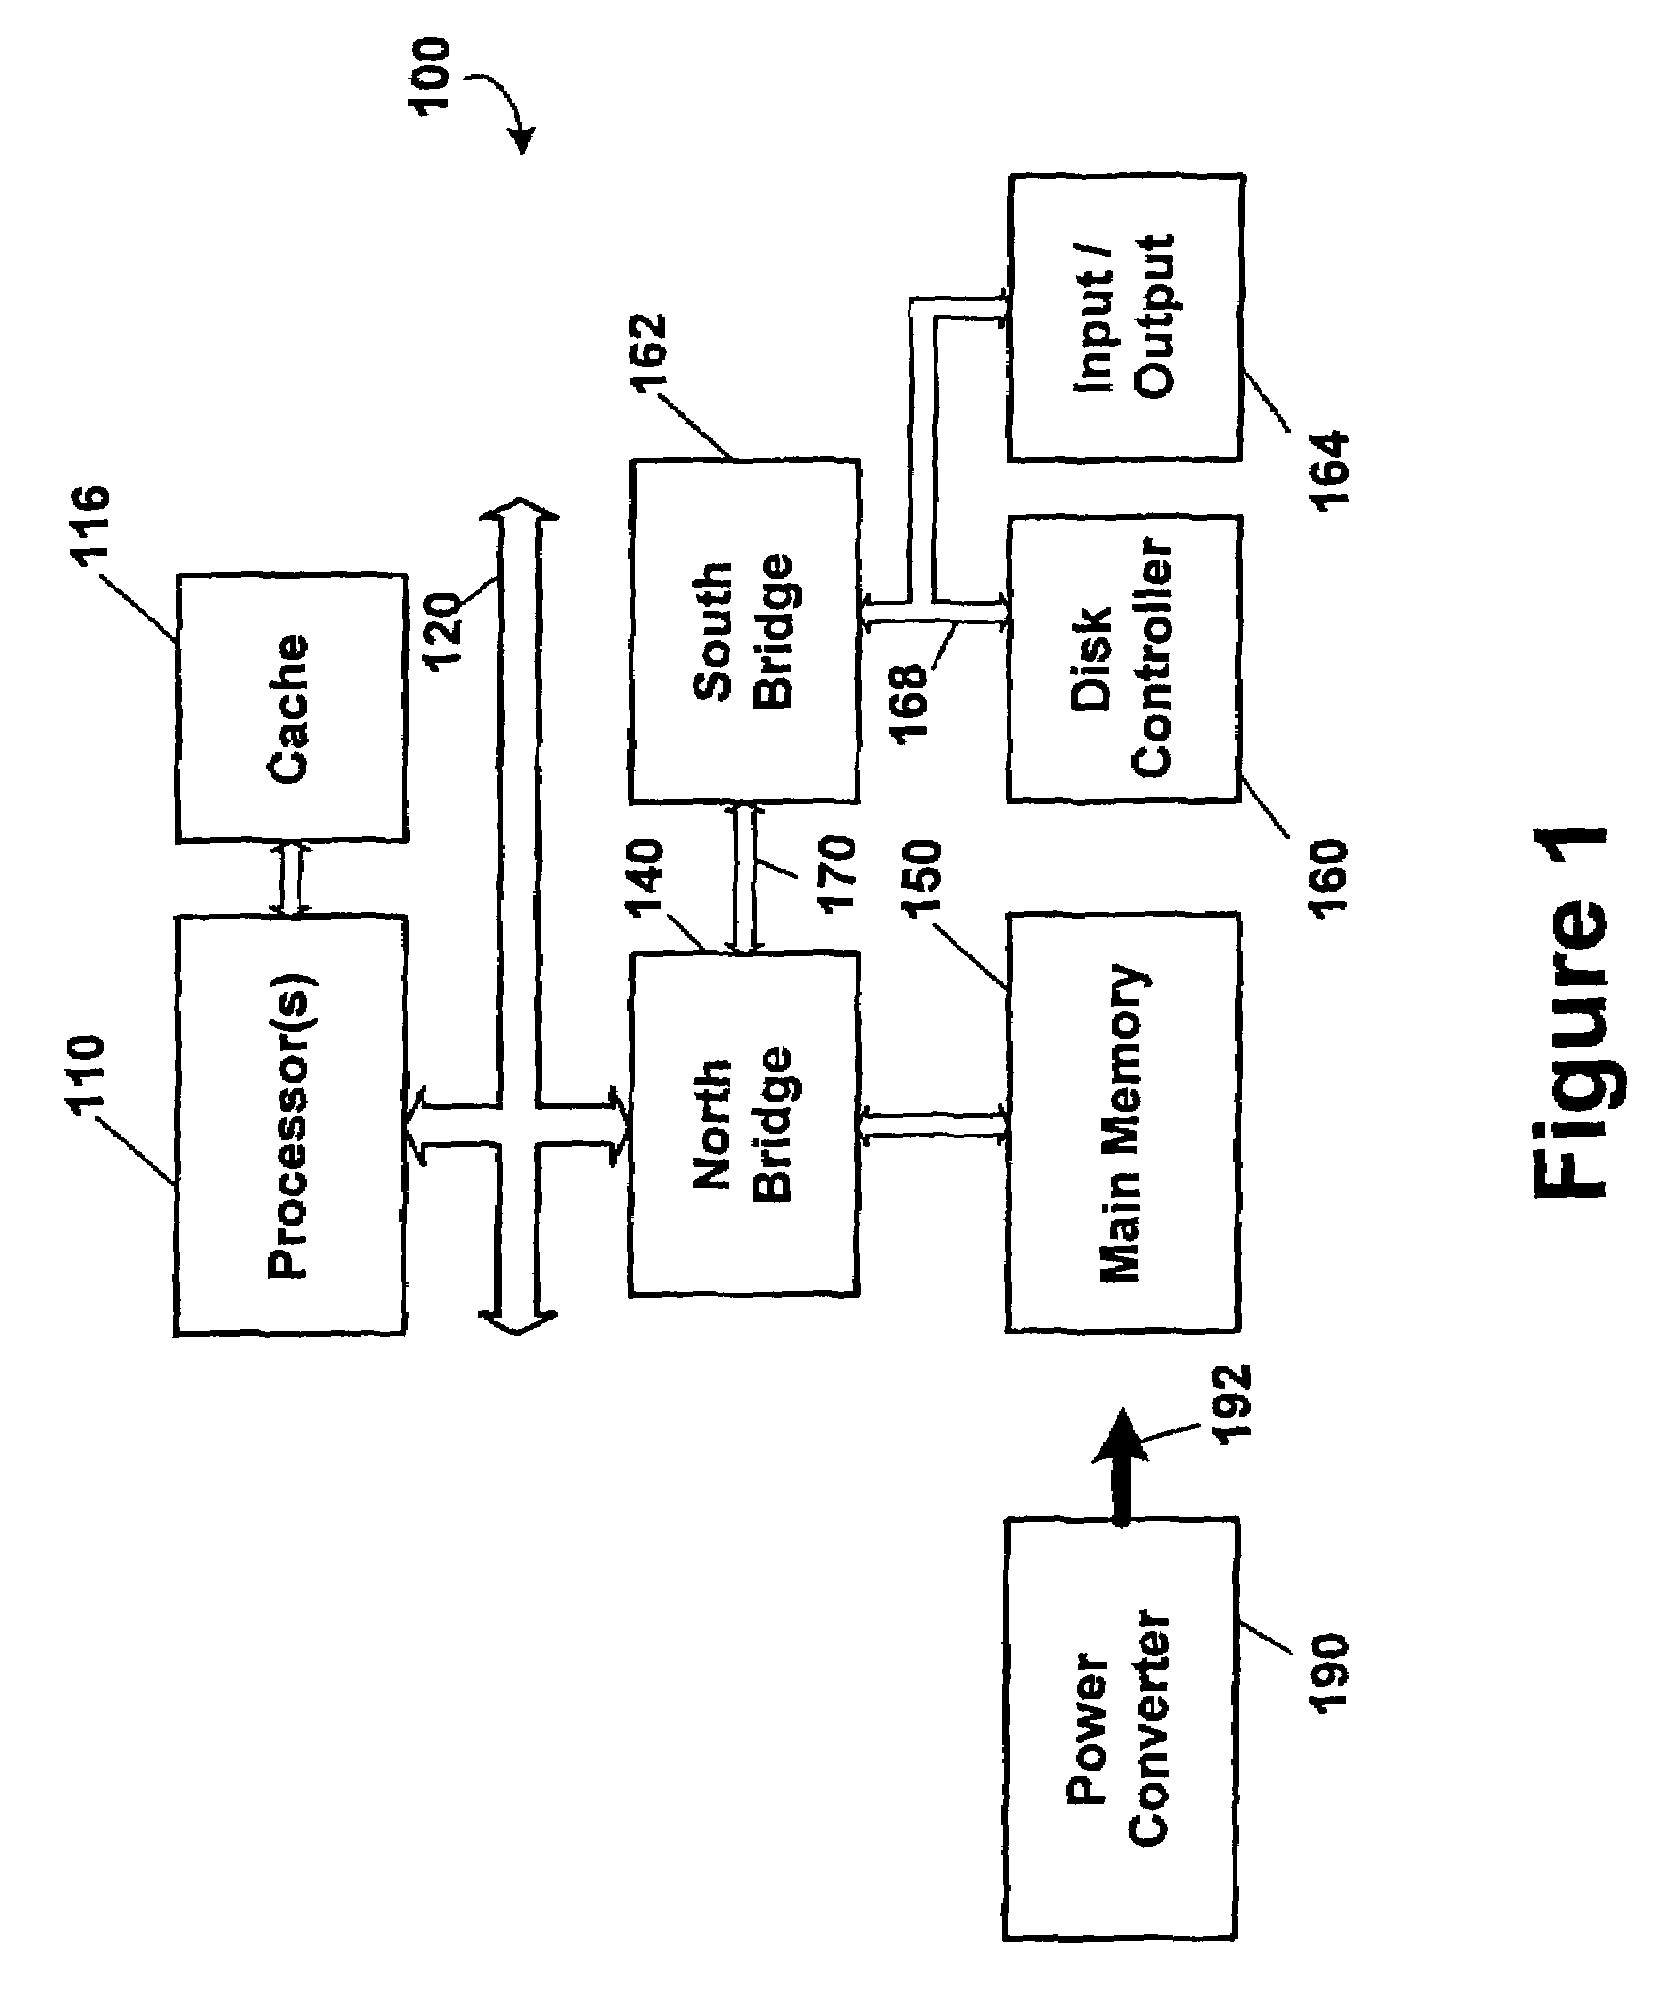 Method of saving energy in an information handling system by controlling a main converter based on the amount of power drawn by the system